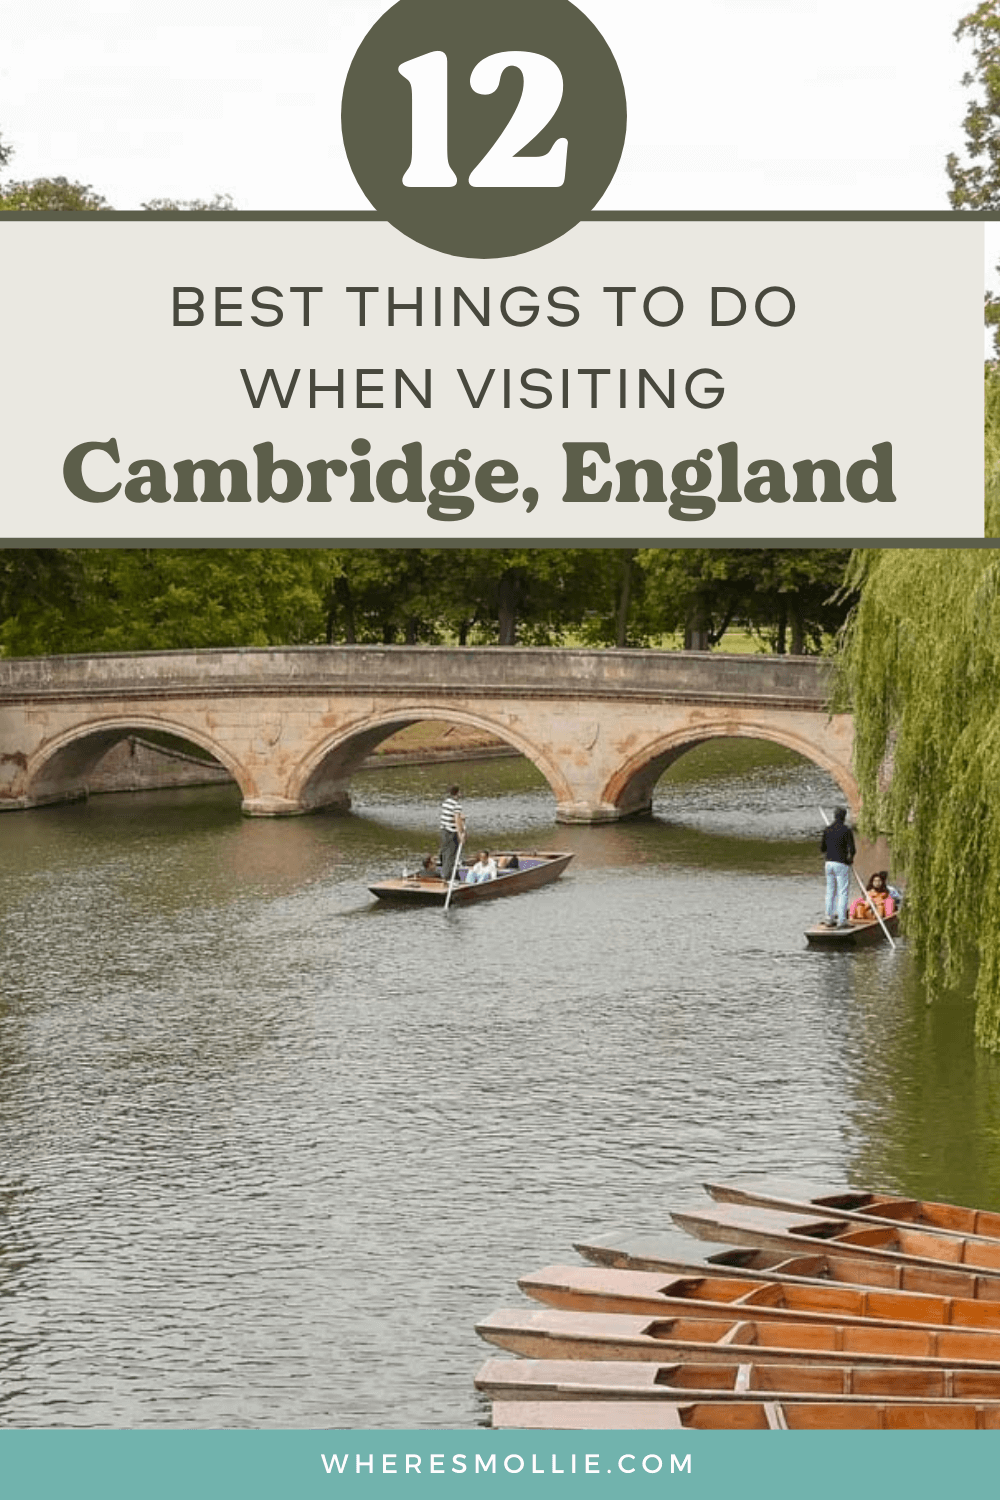 The best things to do in Cambridge, England